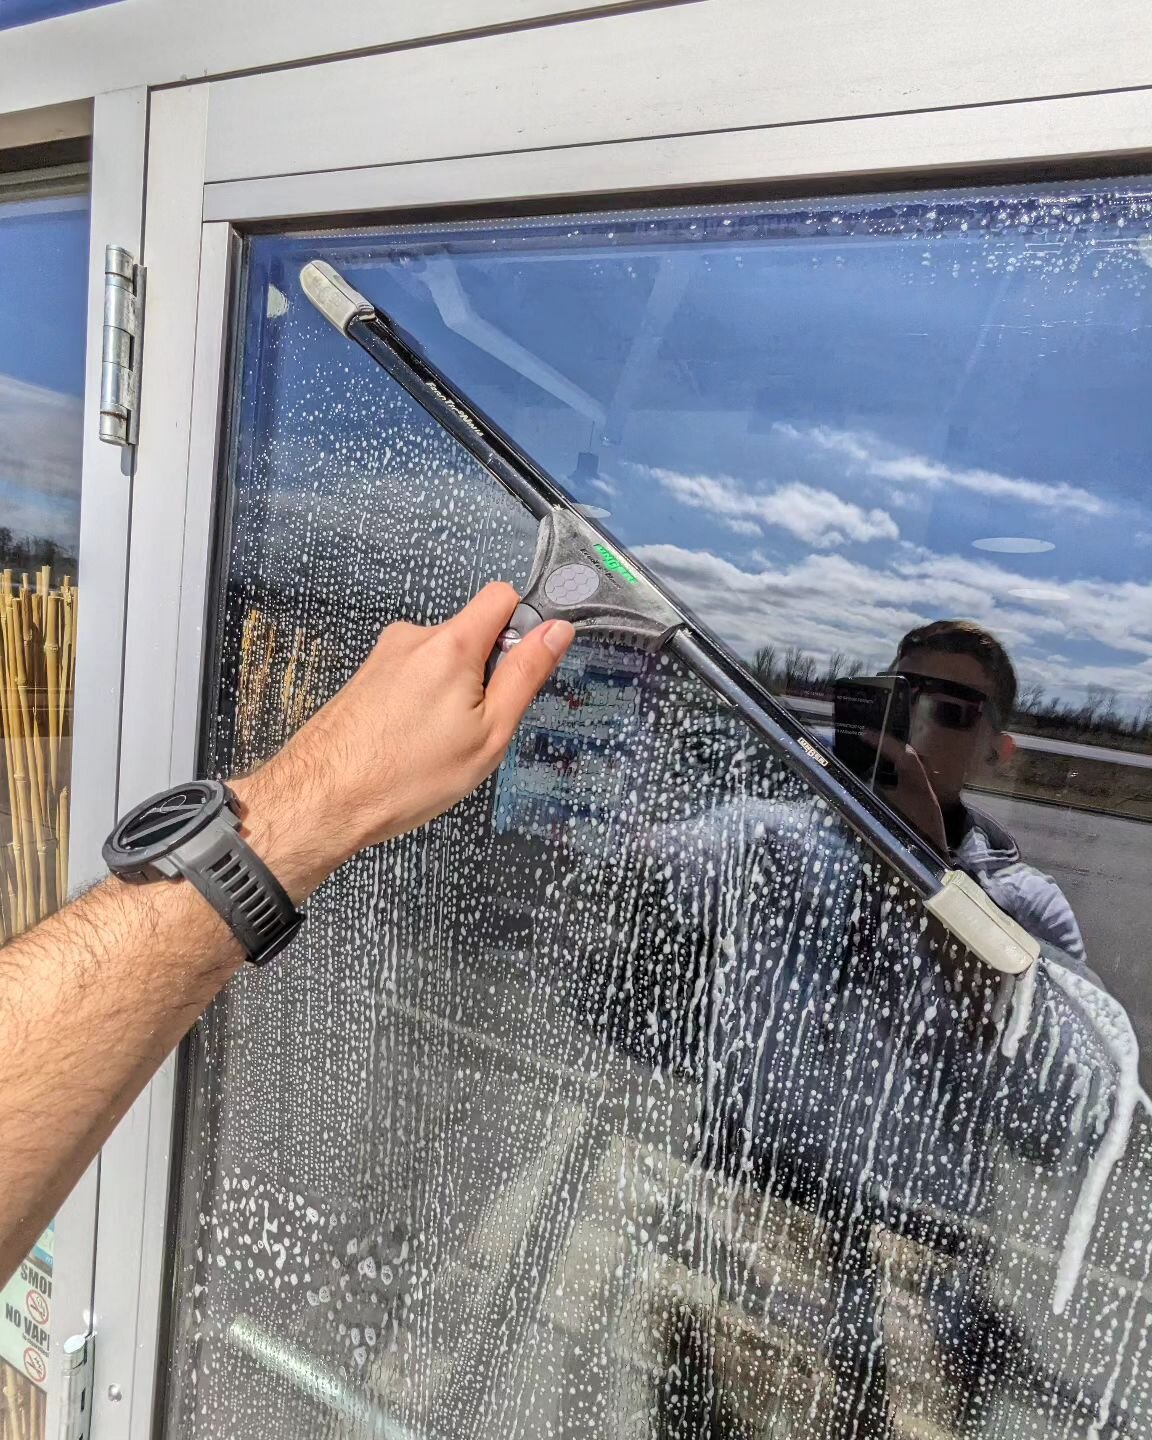 Making our local businesses shine here in Tecumseh 
#yqg #windsorontario #yqgbusiness #windowcleaning #tecumseh